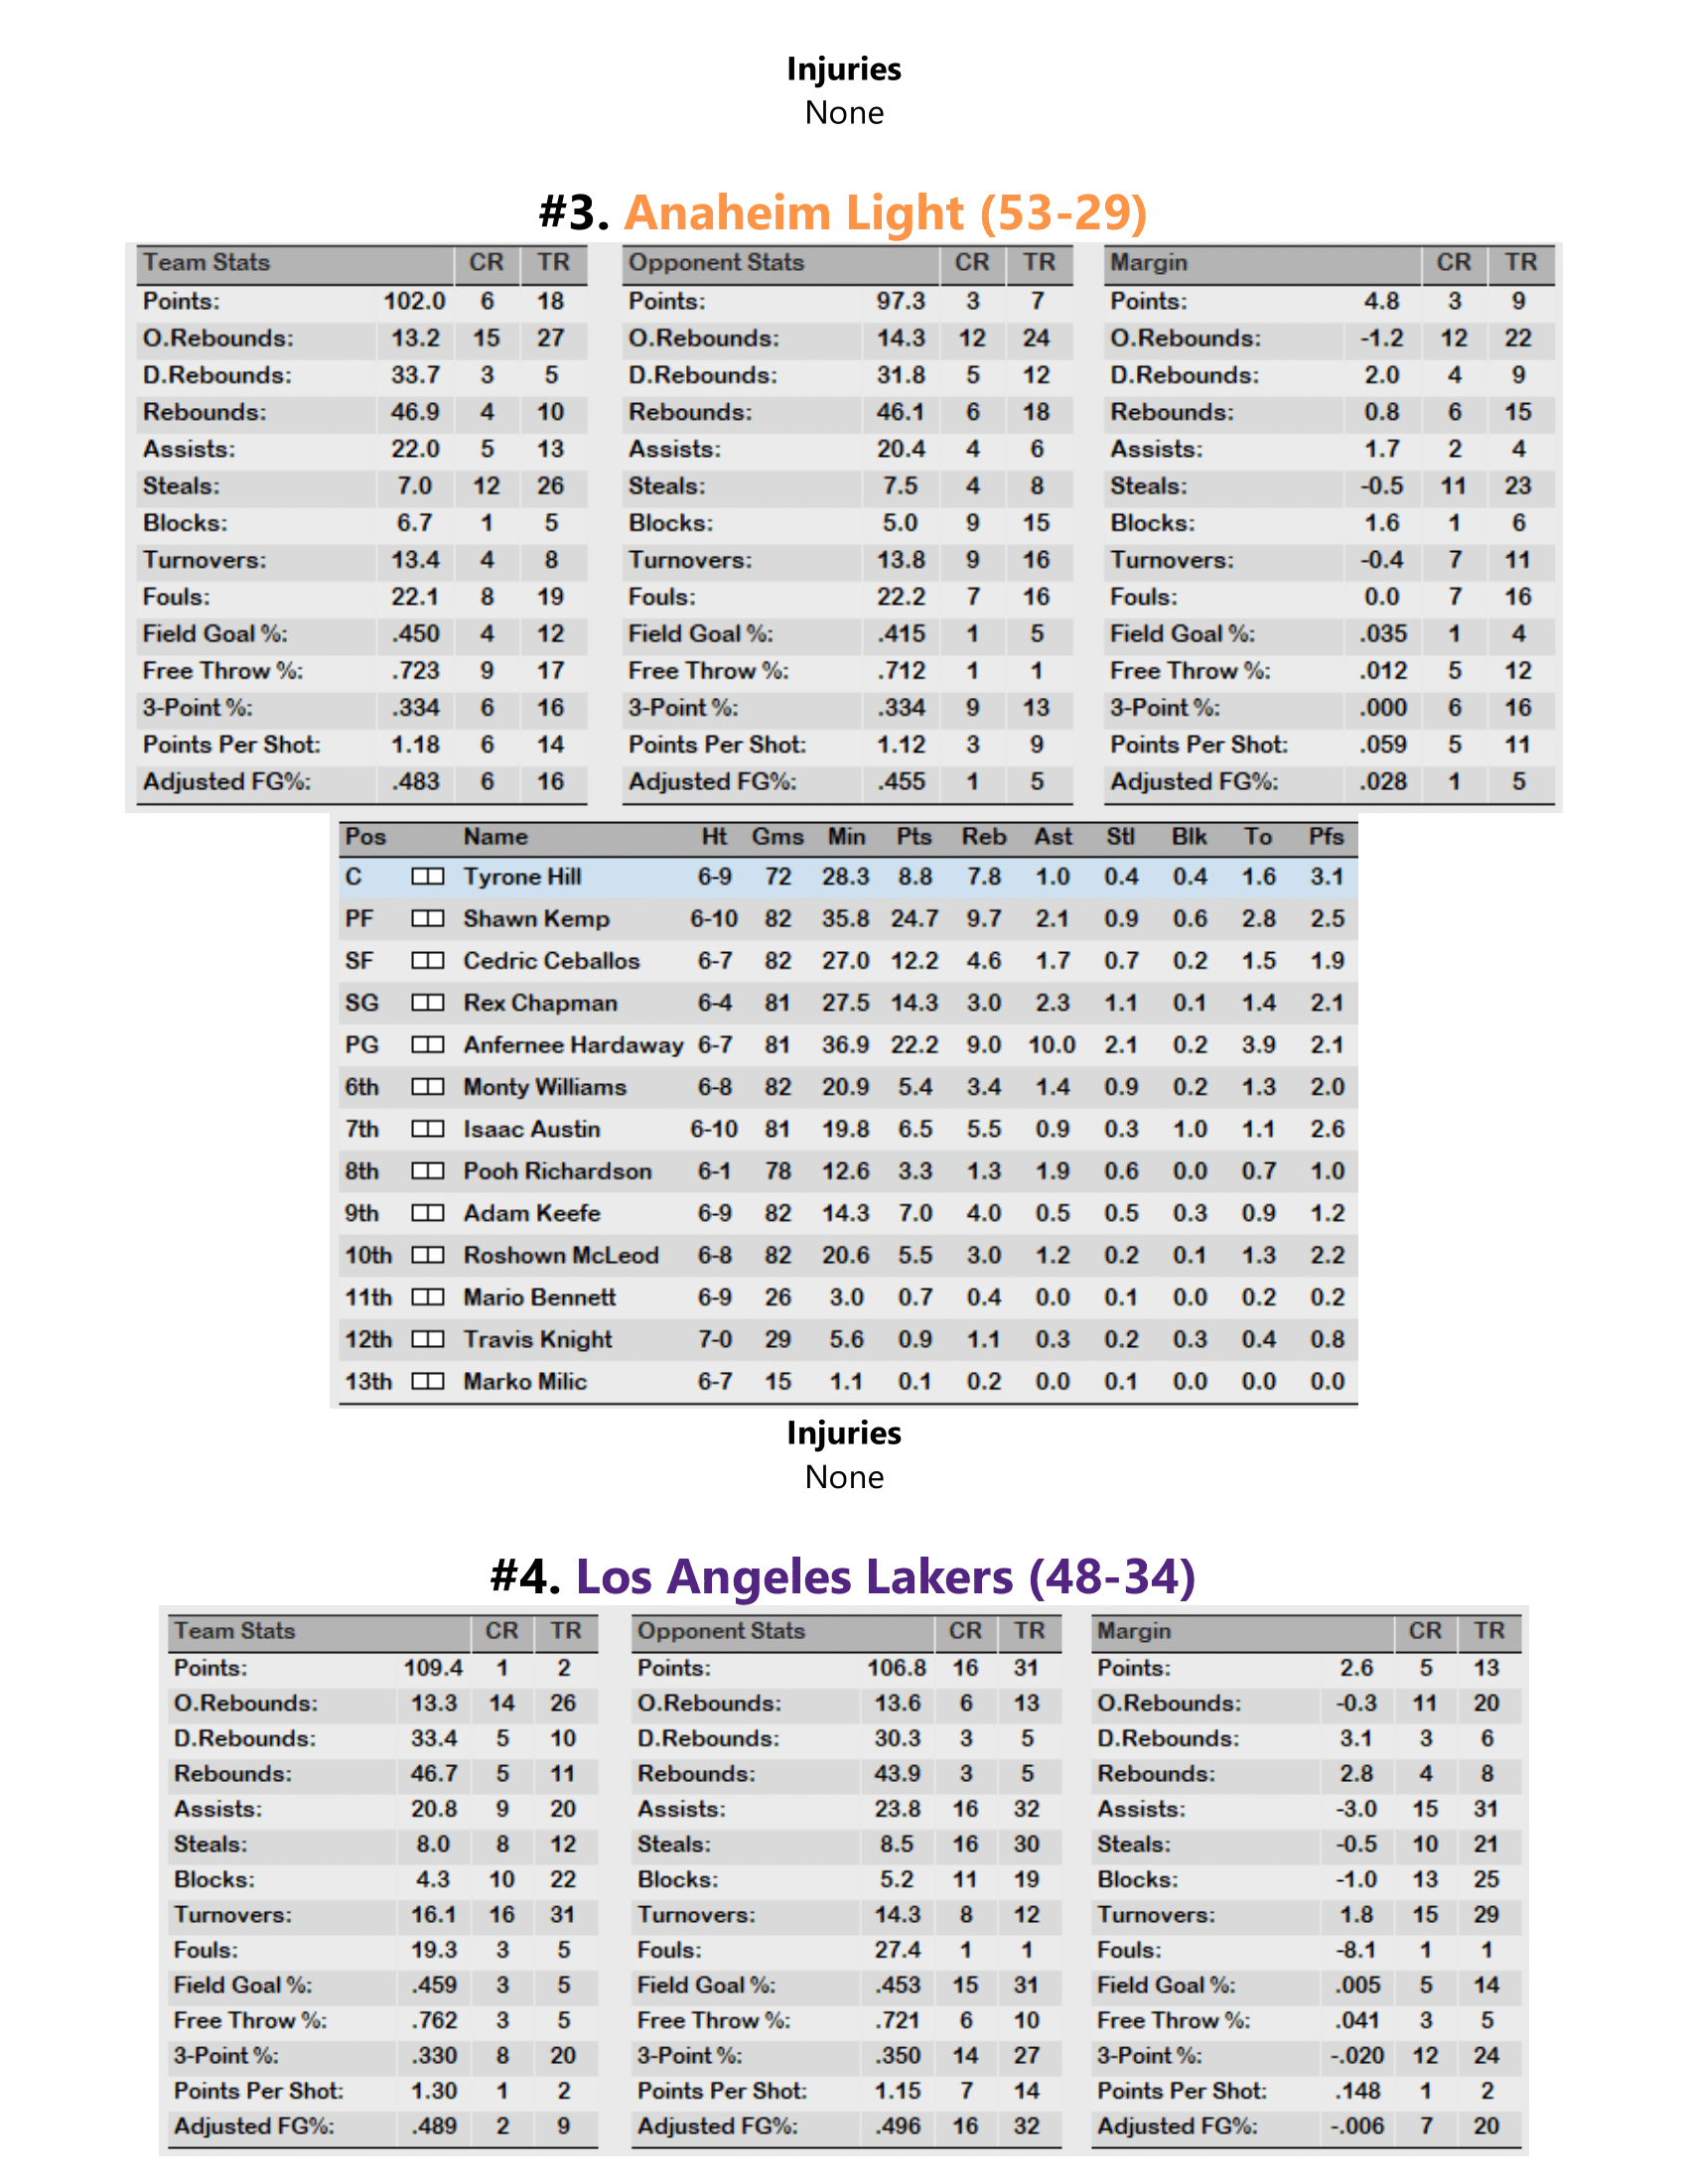 99-00-Part-3-Playoff-Preview-04.png